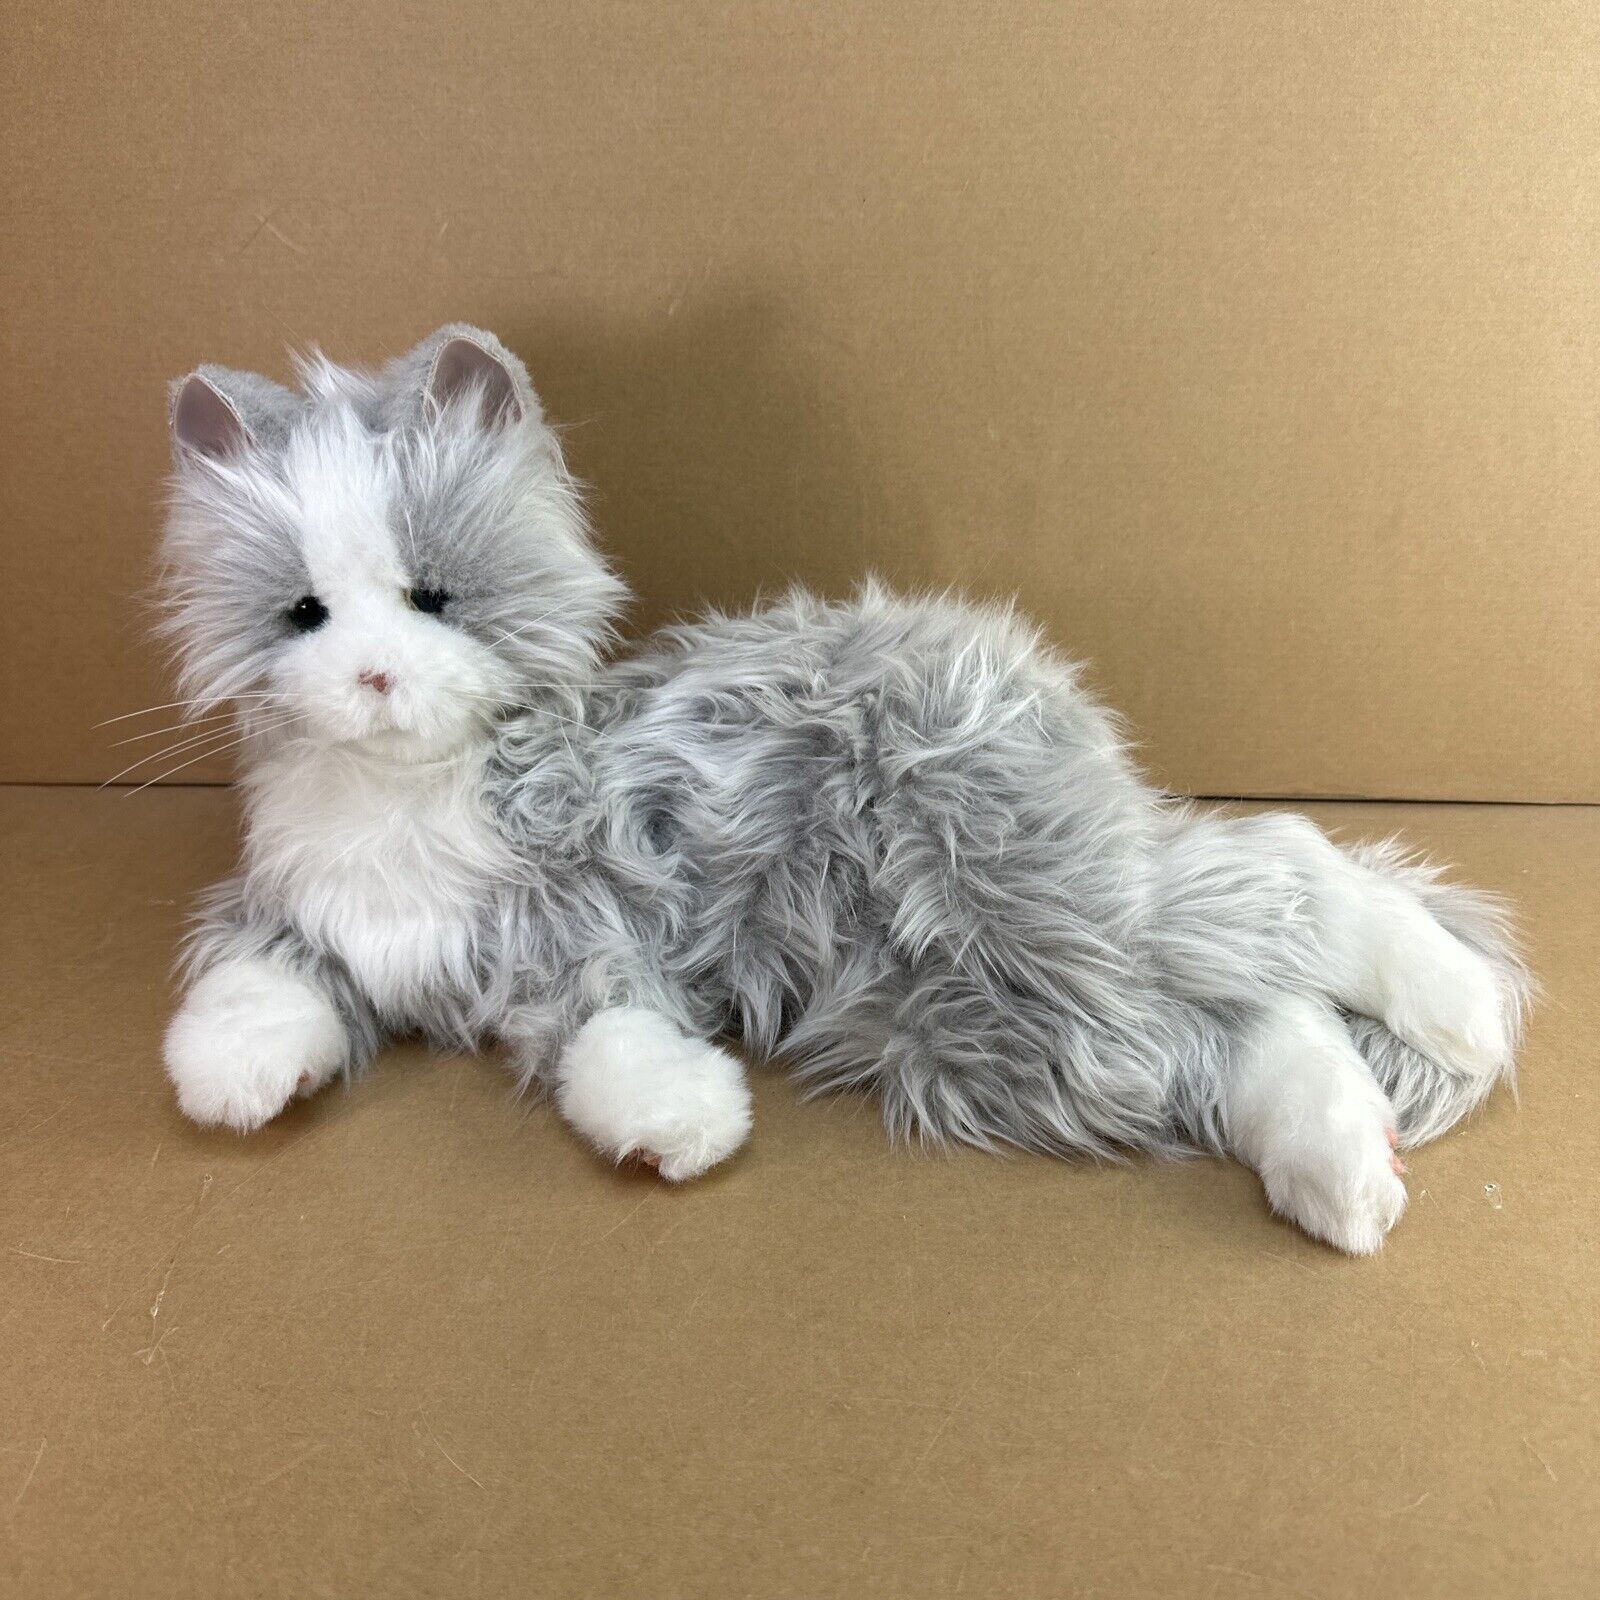 Primary image for Joy For All Companion Therapy Pet Hasbro Silver Cat Mechanical Plush LikeFurreal